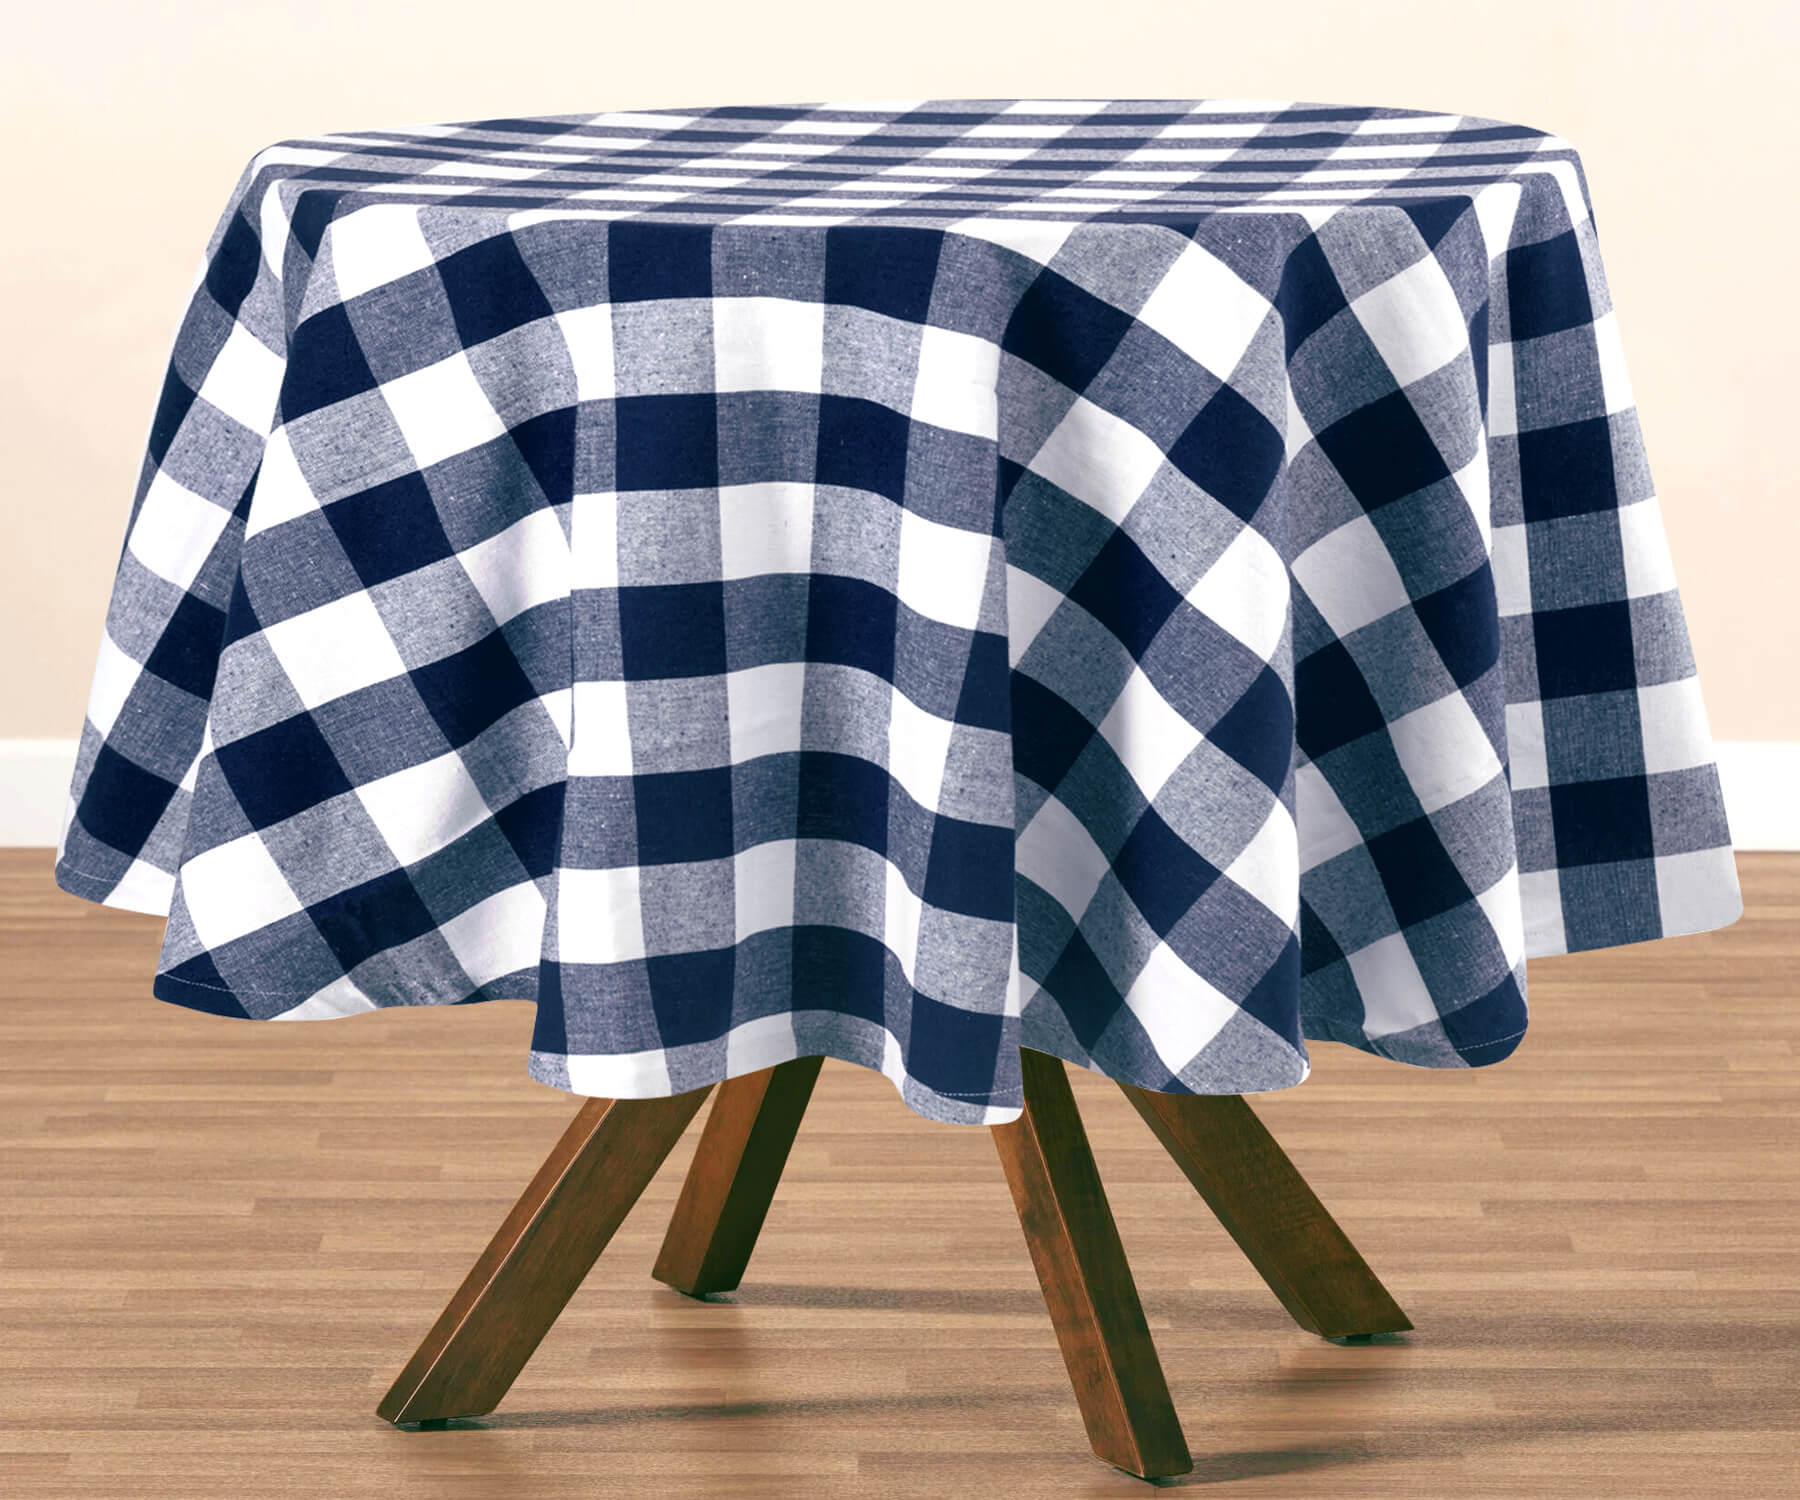  Round Tablecloths | All Cotton and Linen